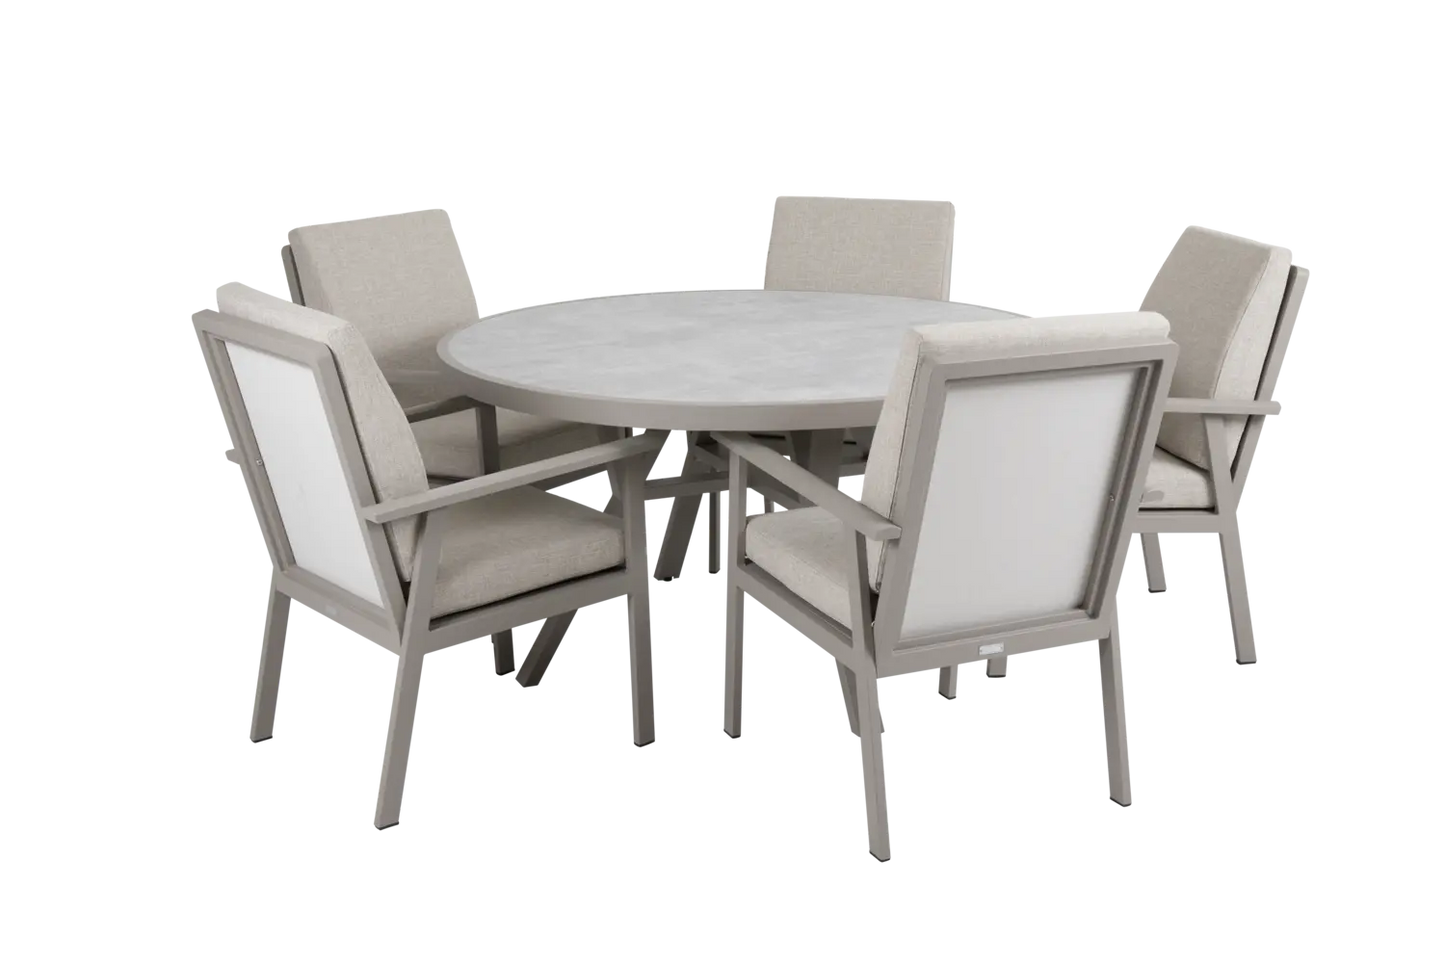 Togetherness around the table, chairs are purchased separately